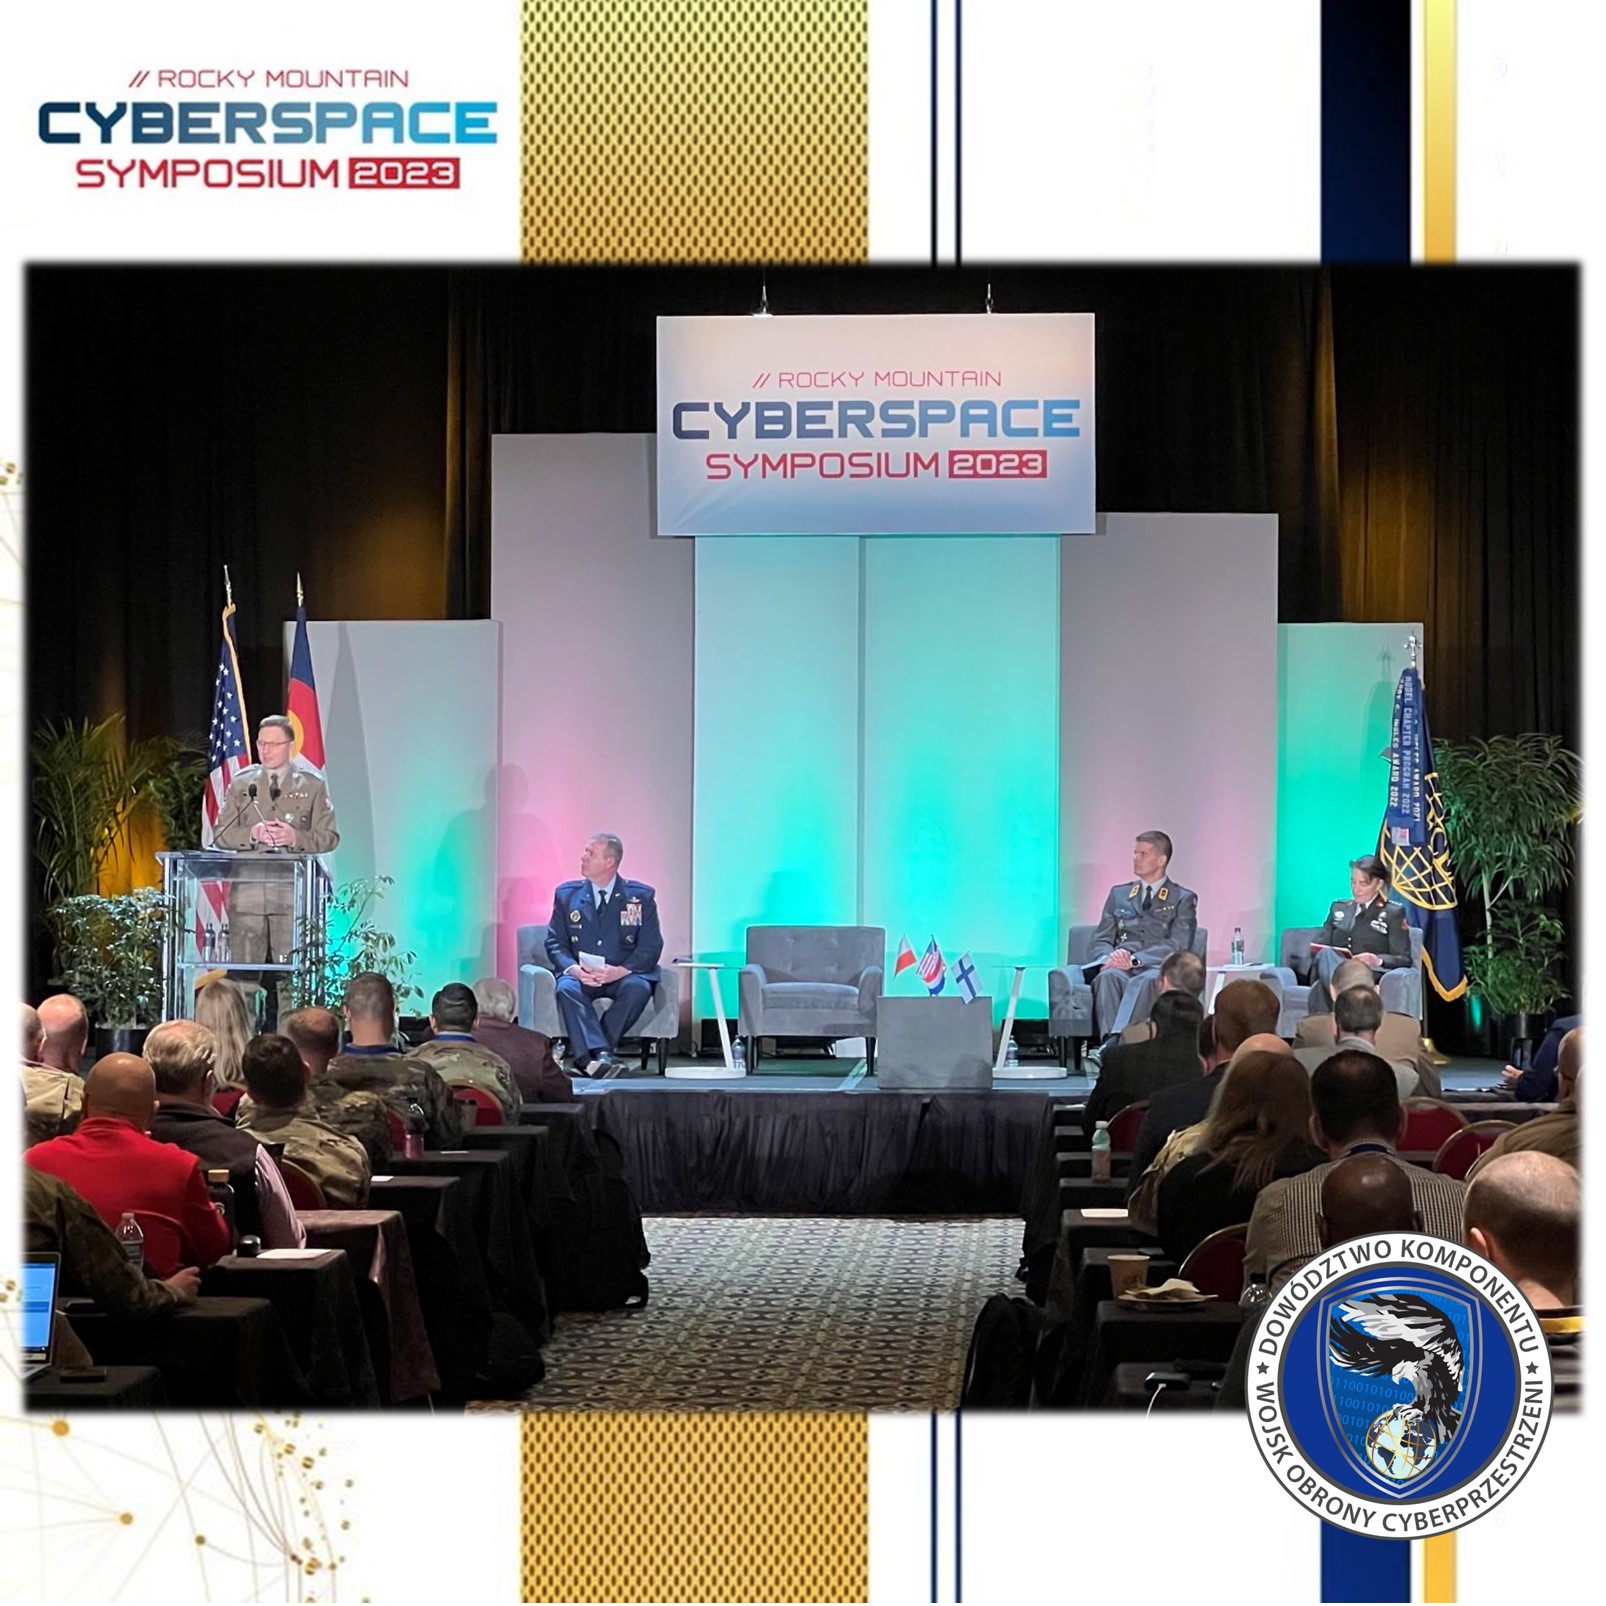 NATO C2COE’s participation in the Rocky Mountain Cyberspace Symposium